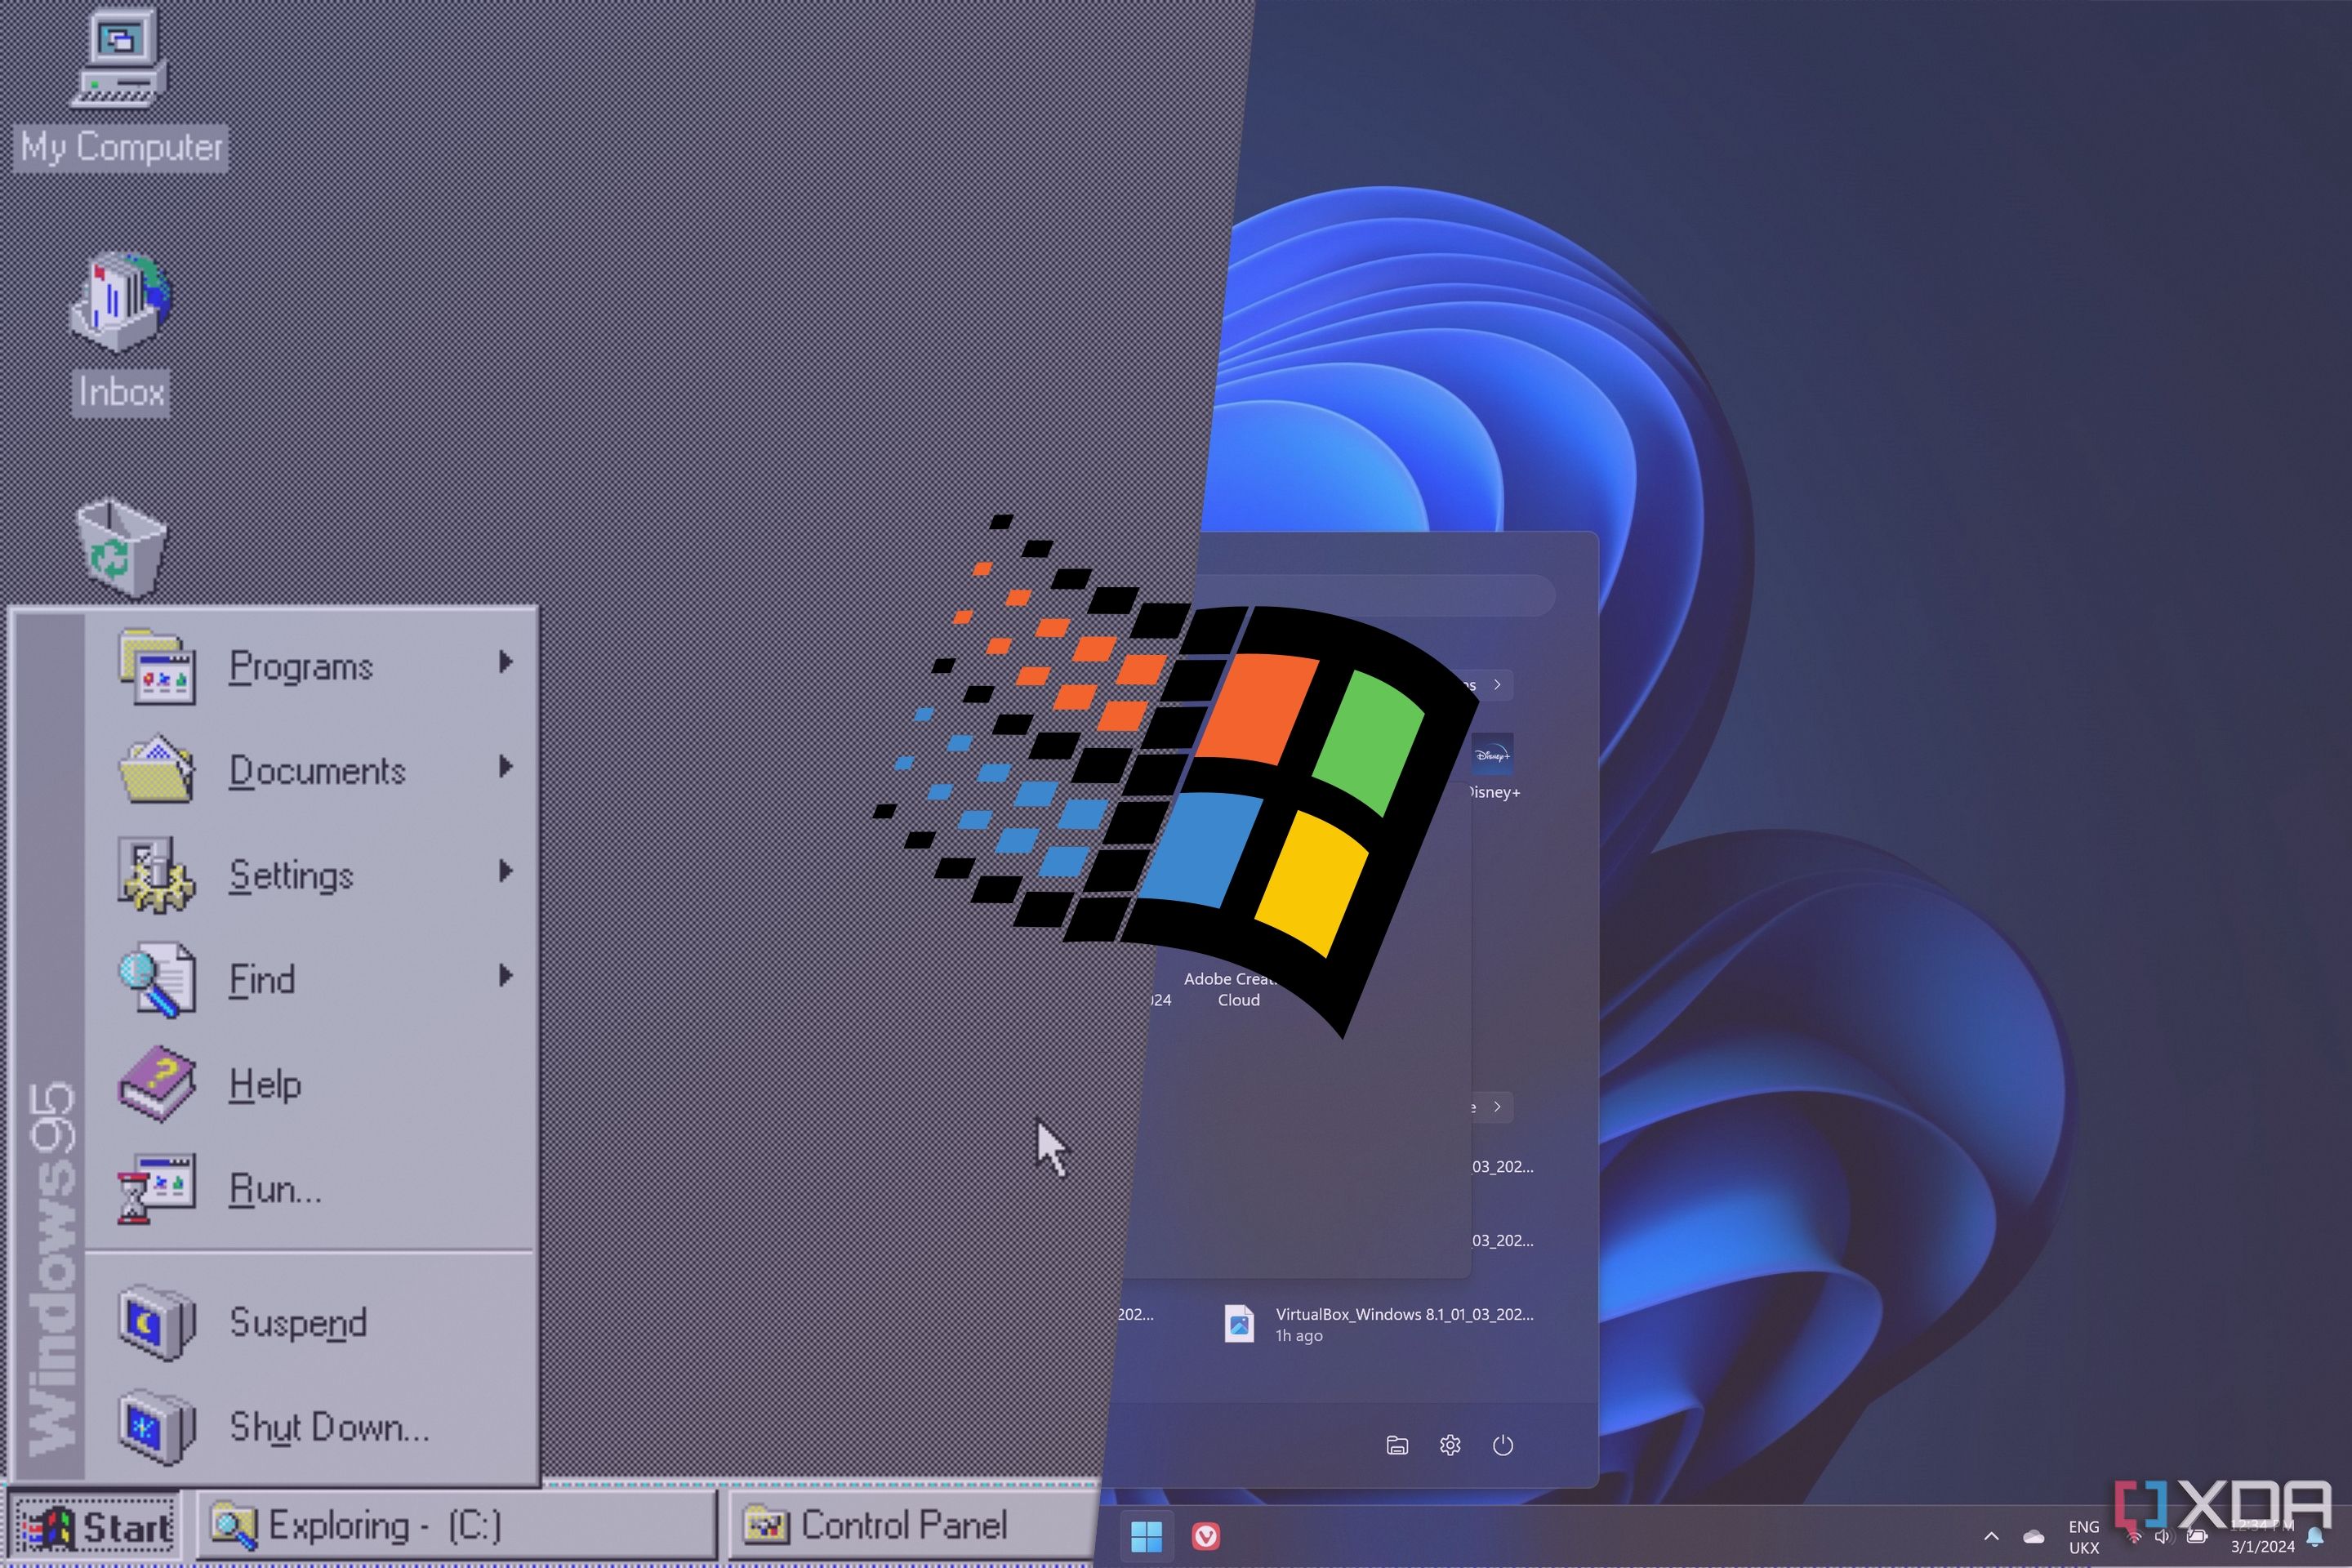 These 5 Windows 11 features have been used since Windows 95